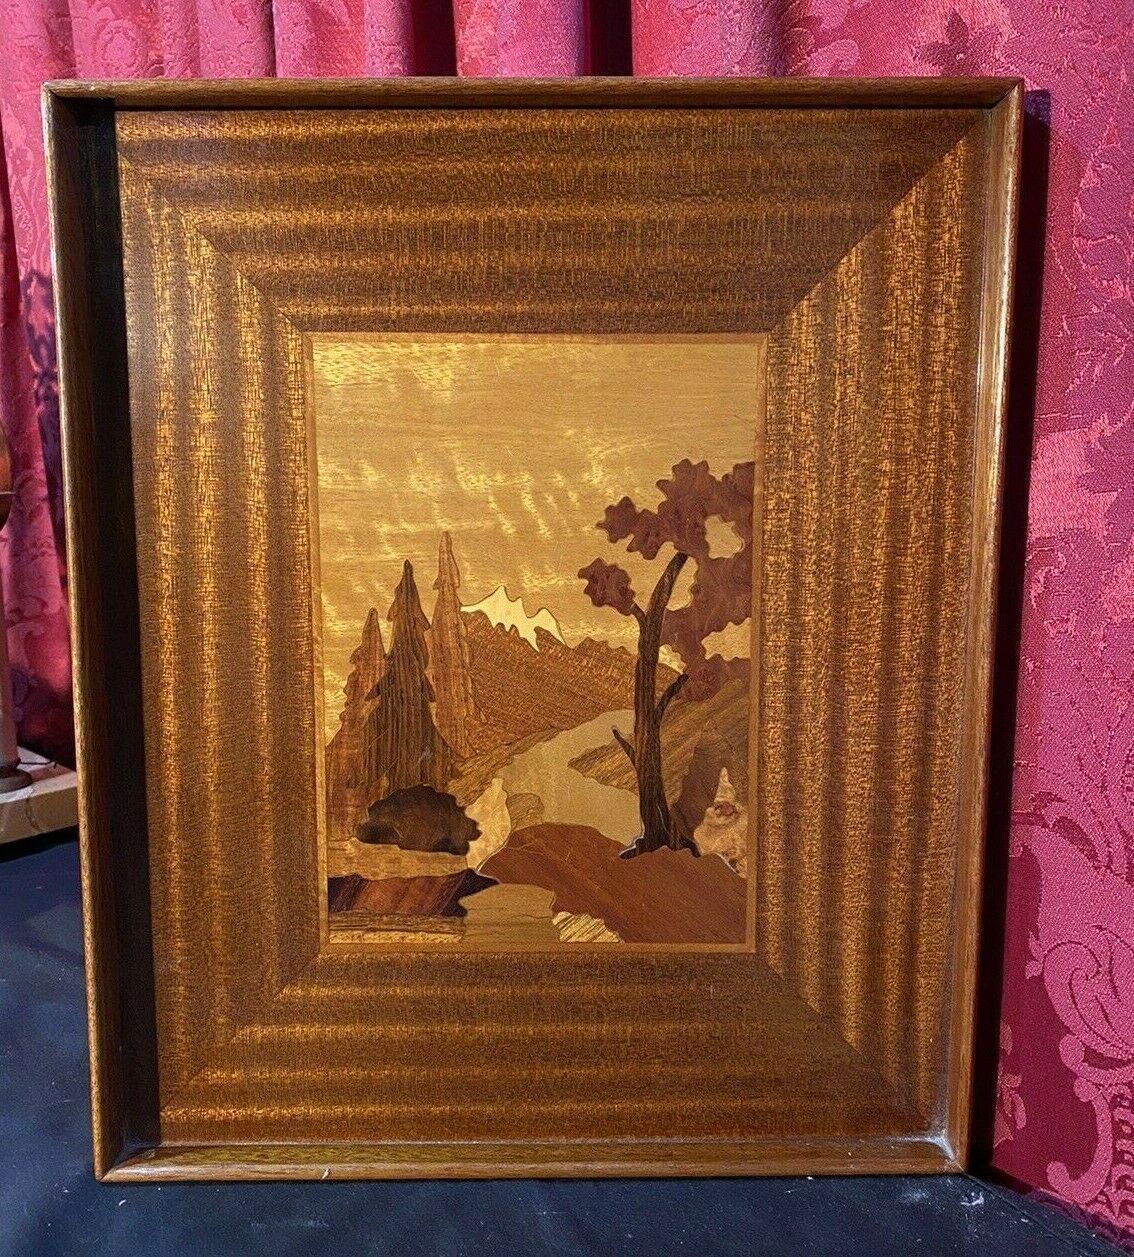 VINTAGE ANTIQUE INLAY SCENIC LANDSCAPE WOODEN PLAQUE / TRAY